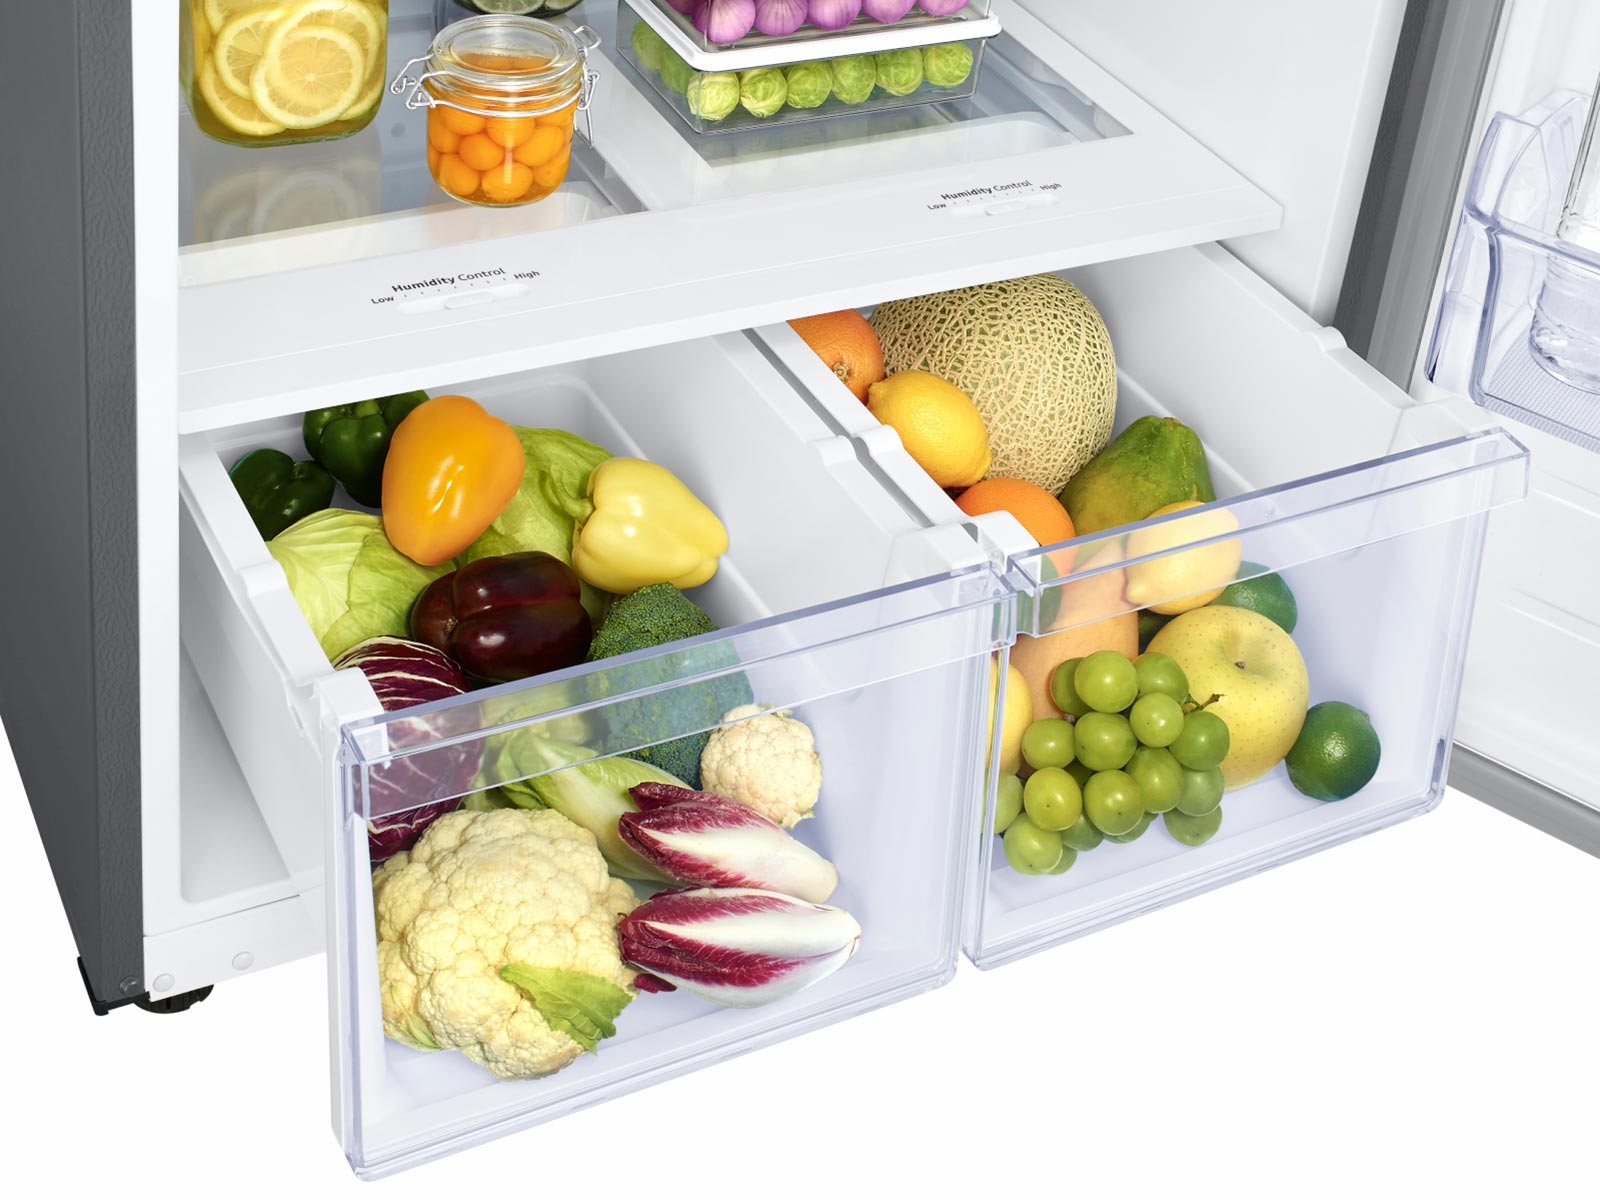 Thumbnail image of 21 cu. ft. Top Freezer Refrigerator with FlexZone&trade; and Ice Maker in Stainless Steel